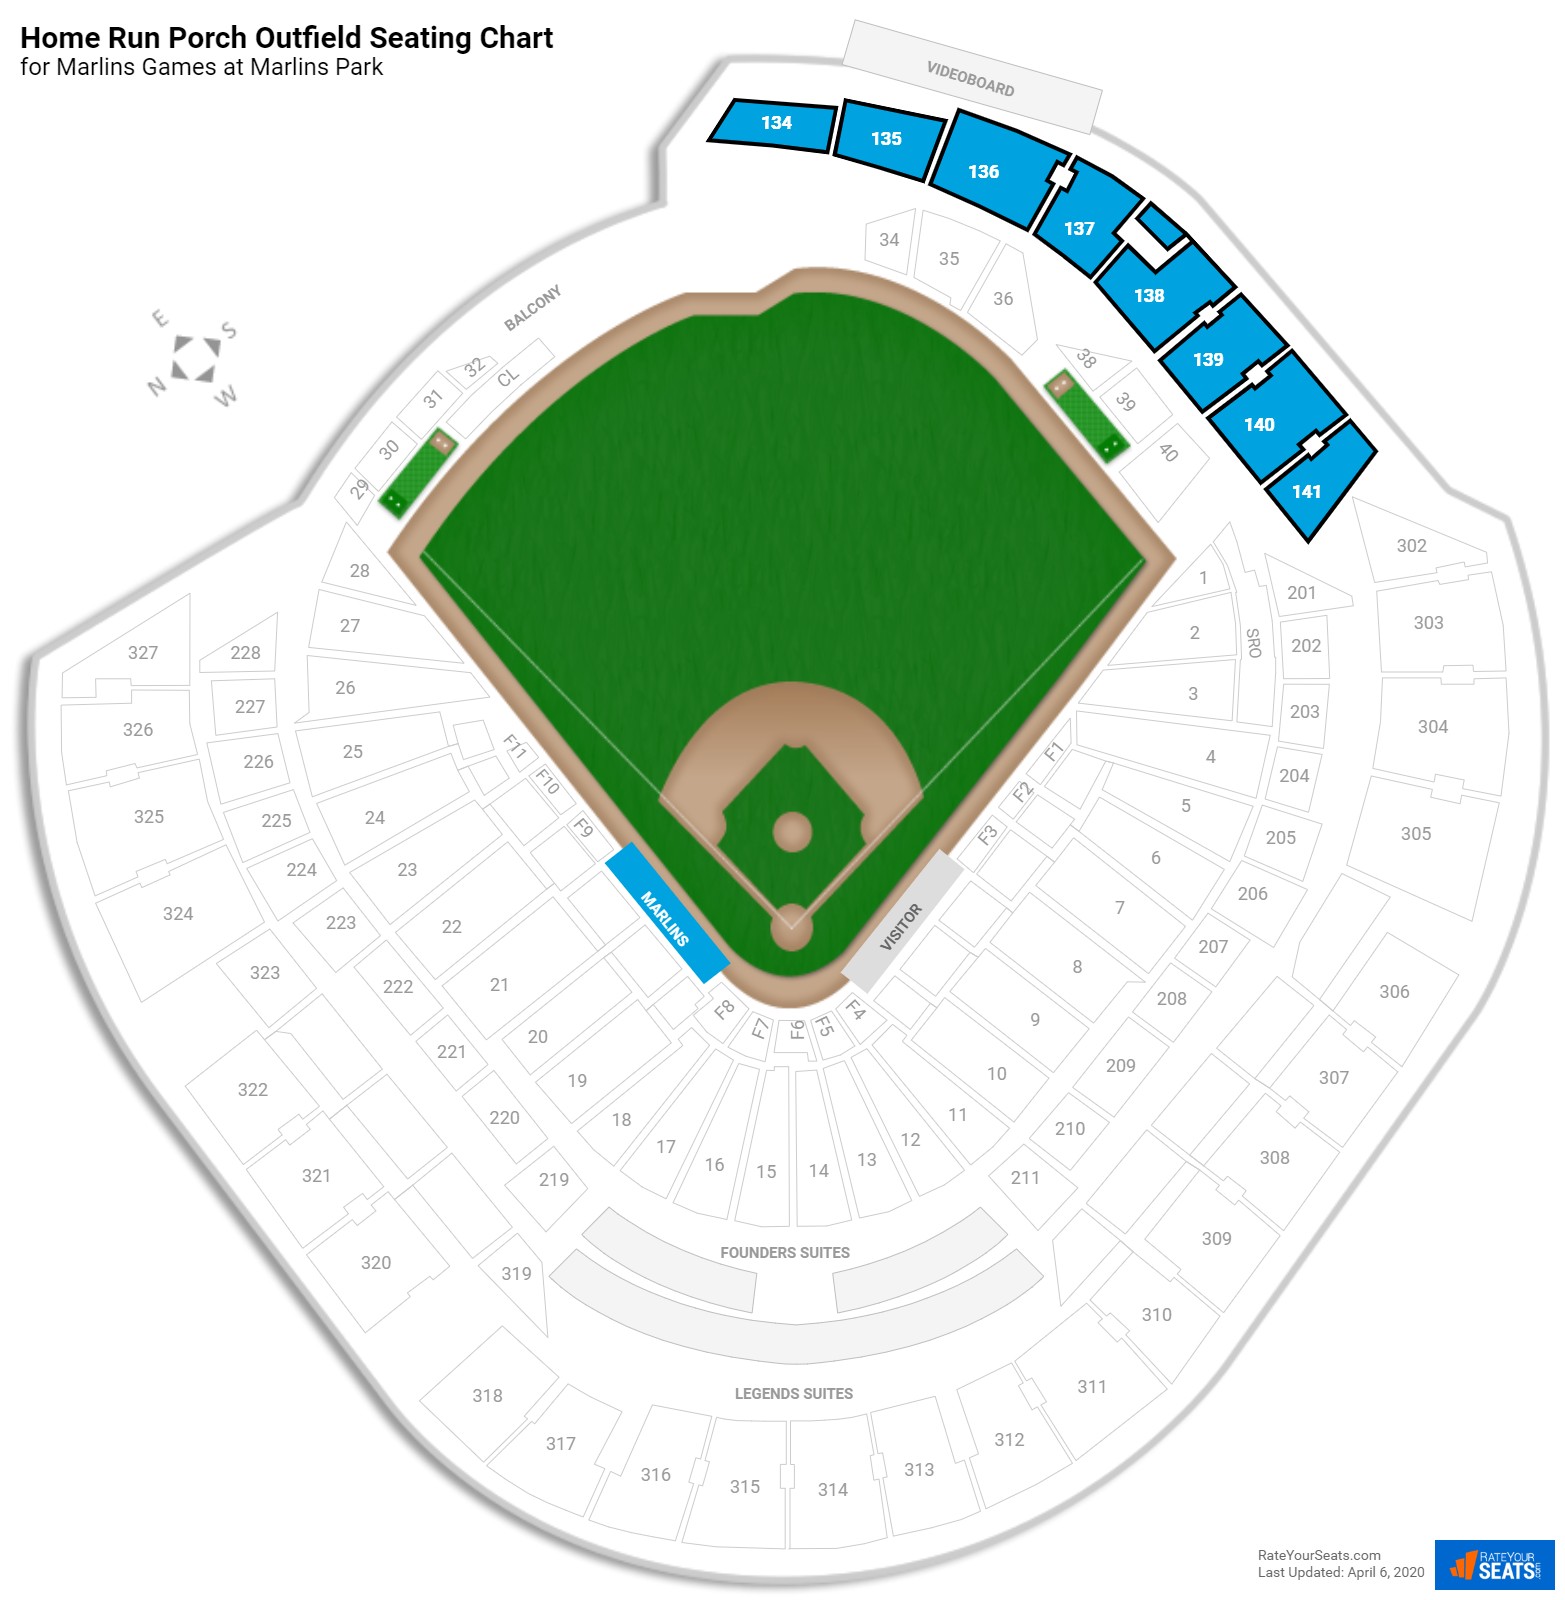 home run porch outfield - marlins park baseball seating